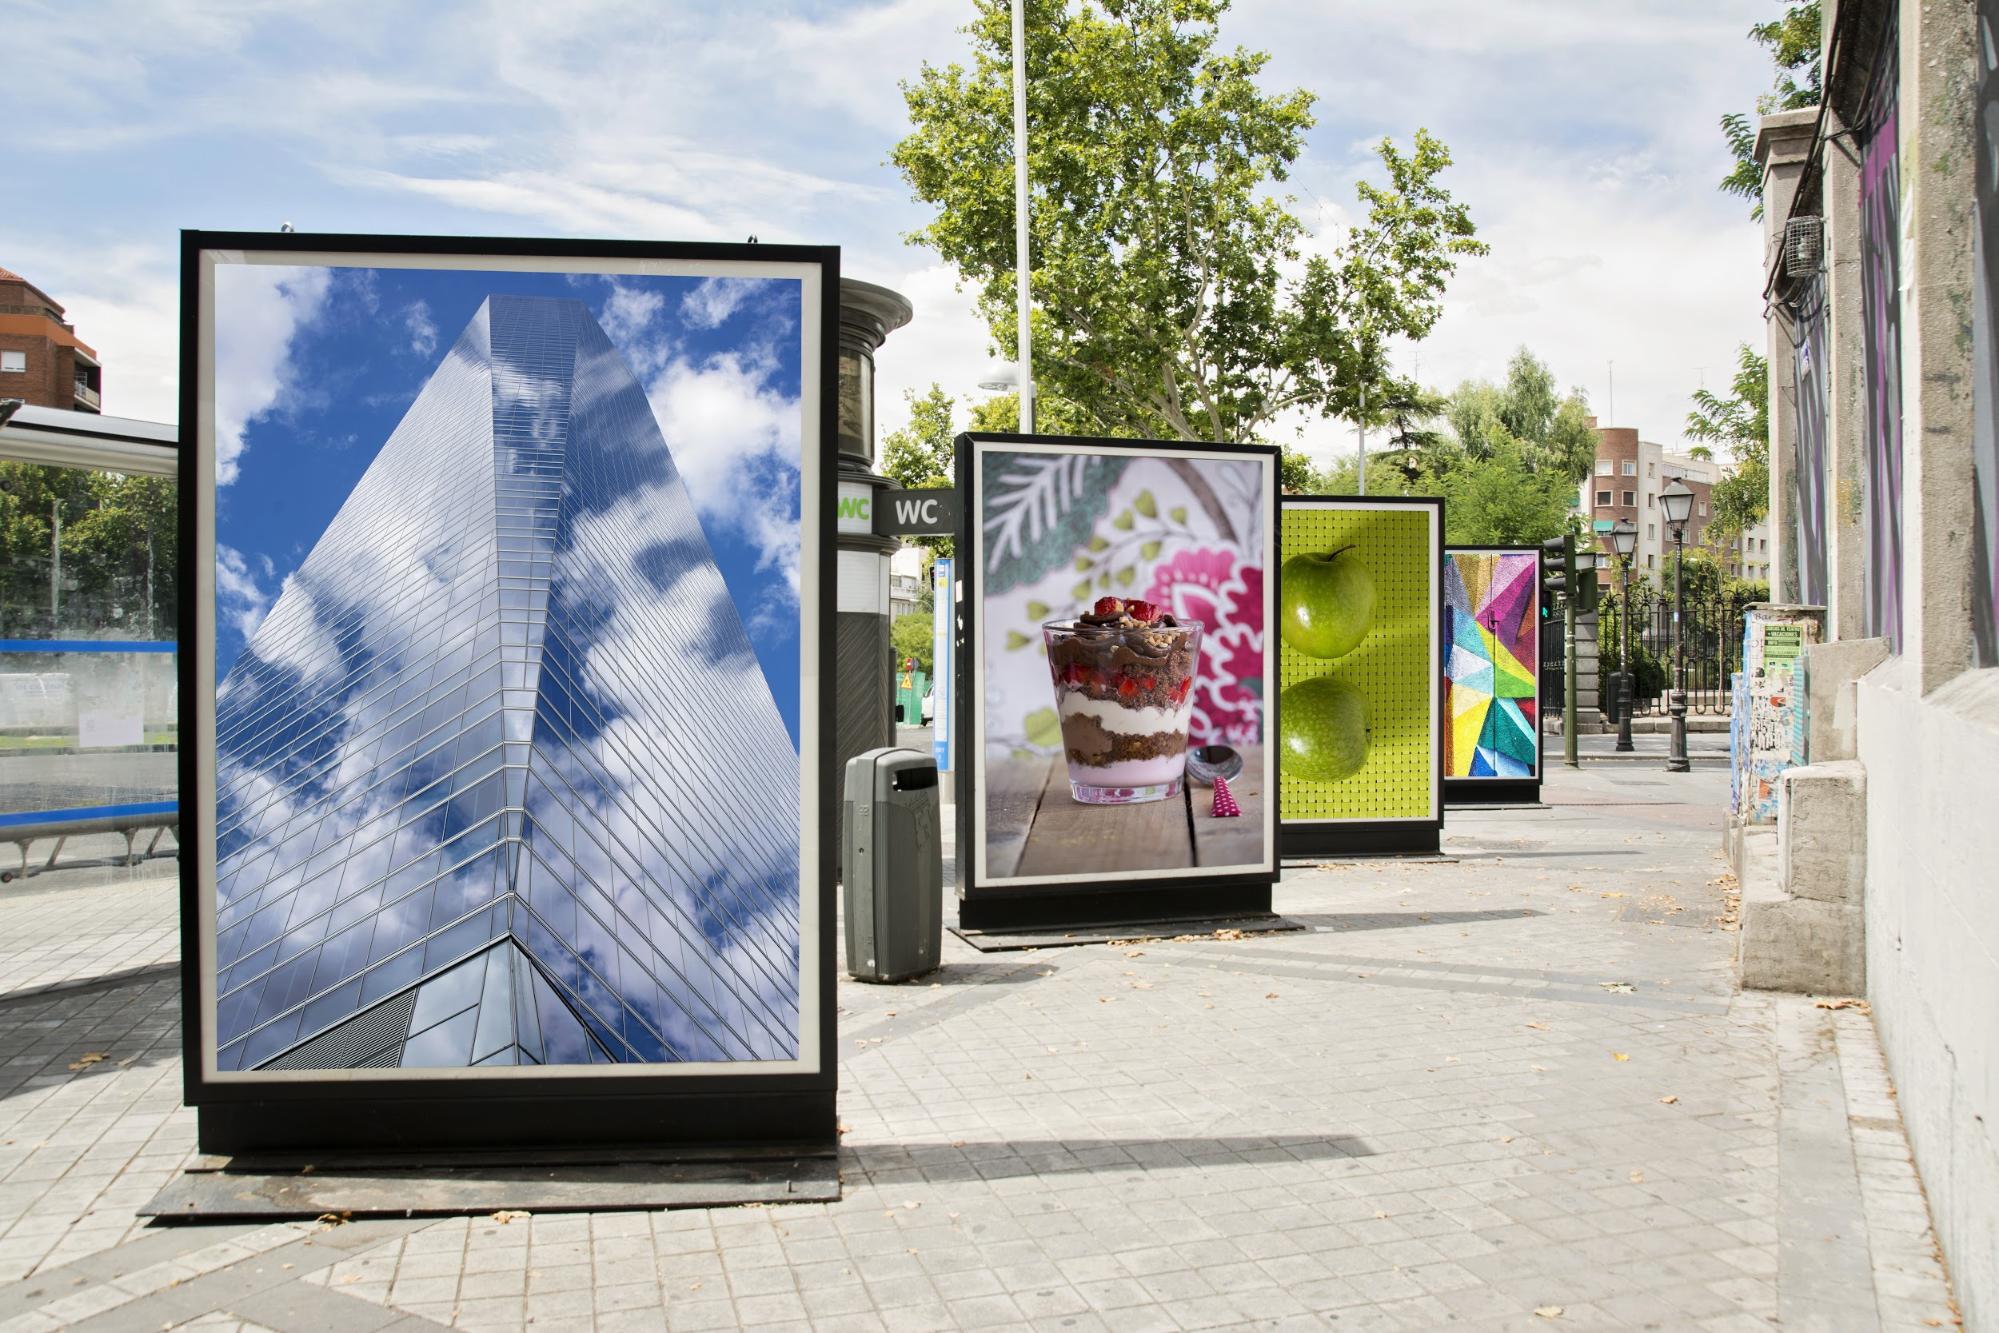 outdoor digital signage in retail